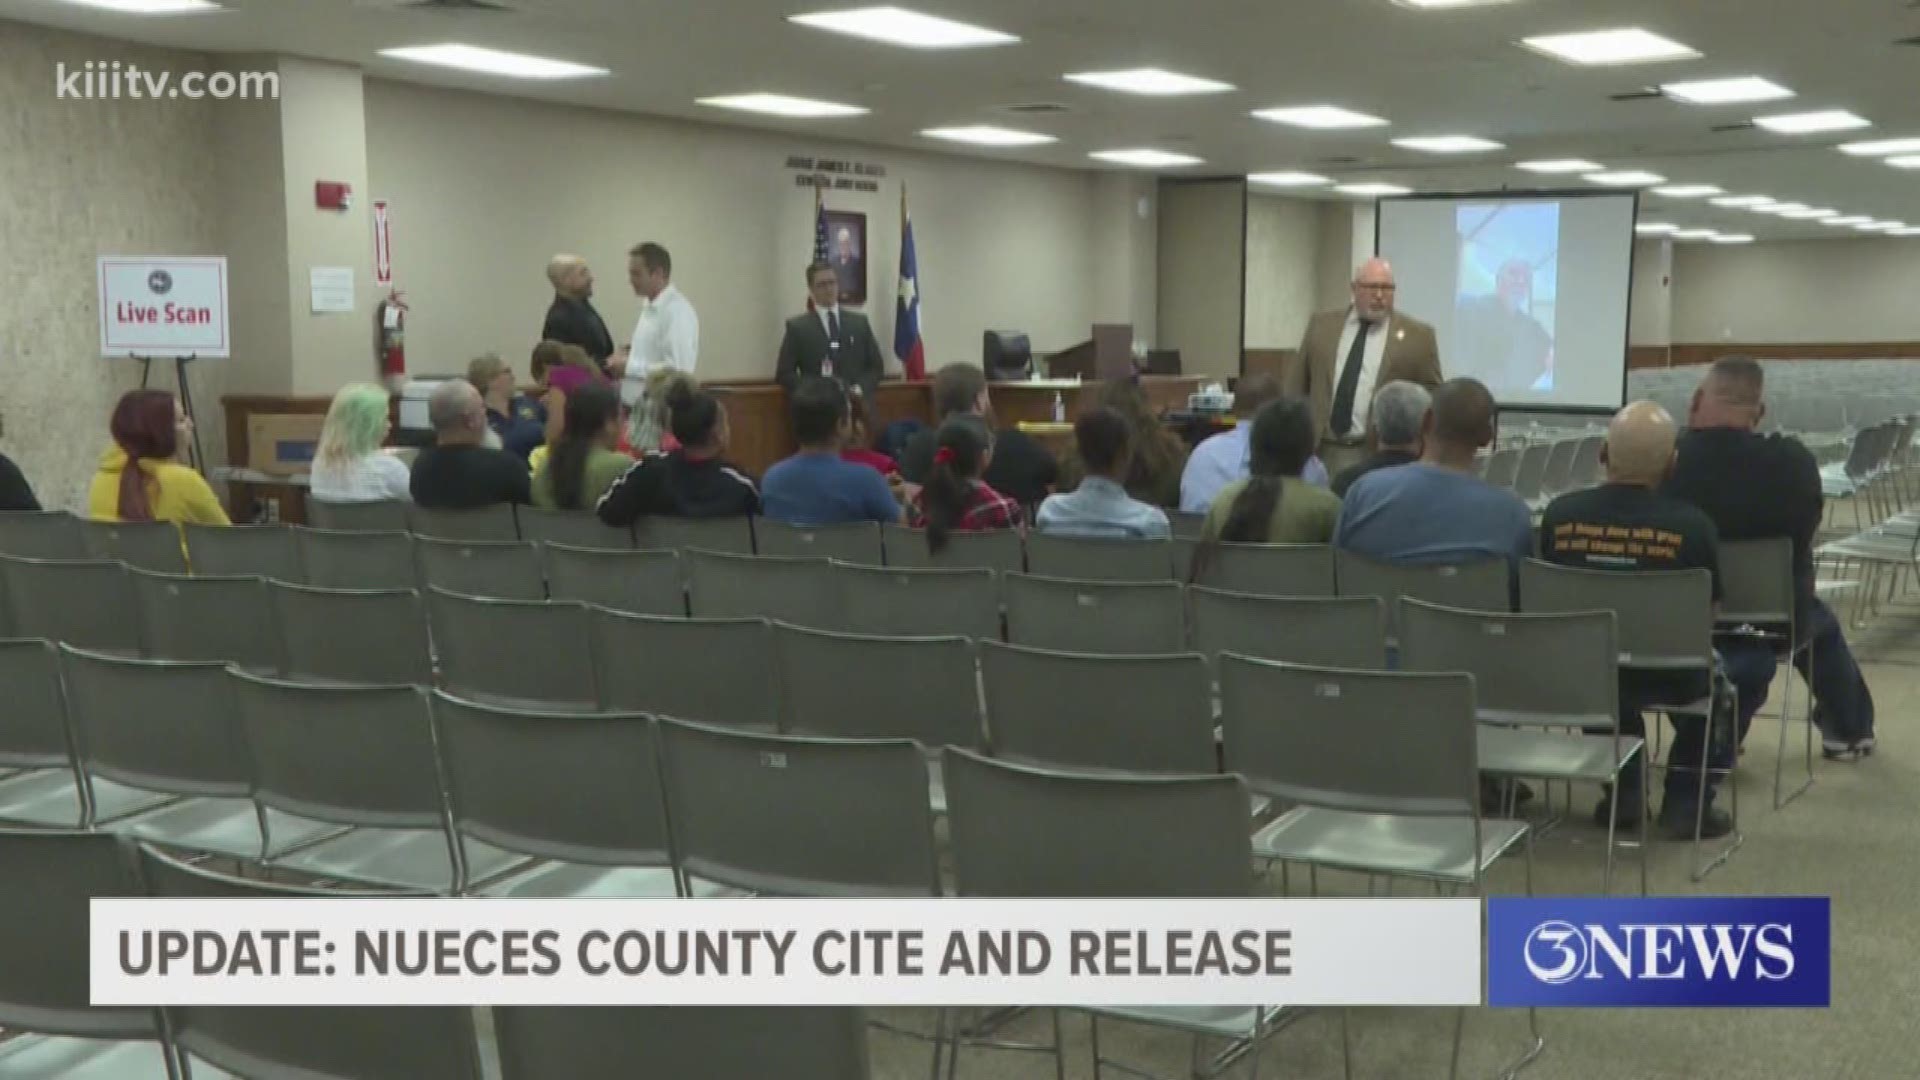 The Nueces County District Attorney's Office first implemented their cite and release program in April. The idea for the program is to give people accused of low-level offenses the chance to pay a fine rather than face jail time.